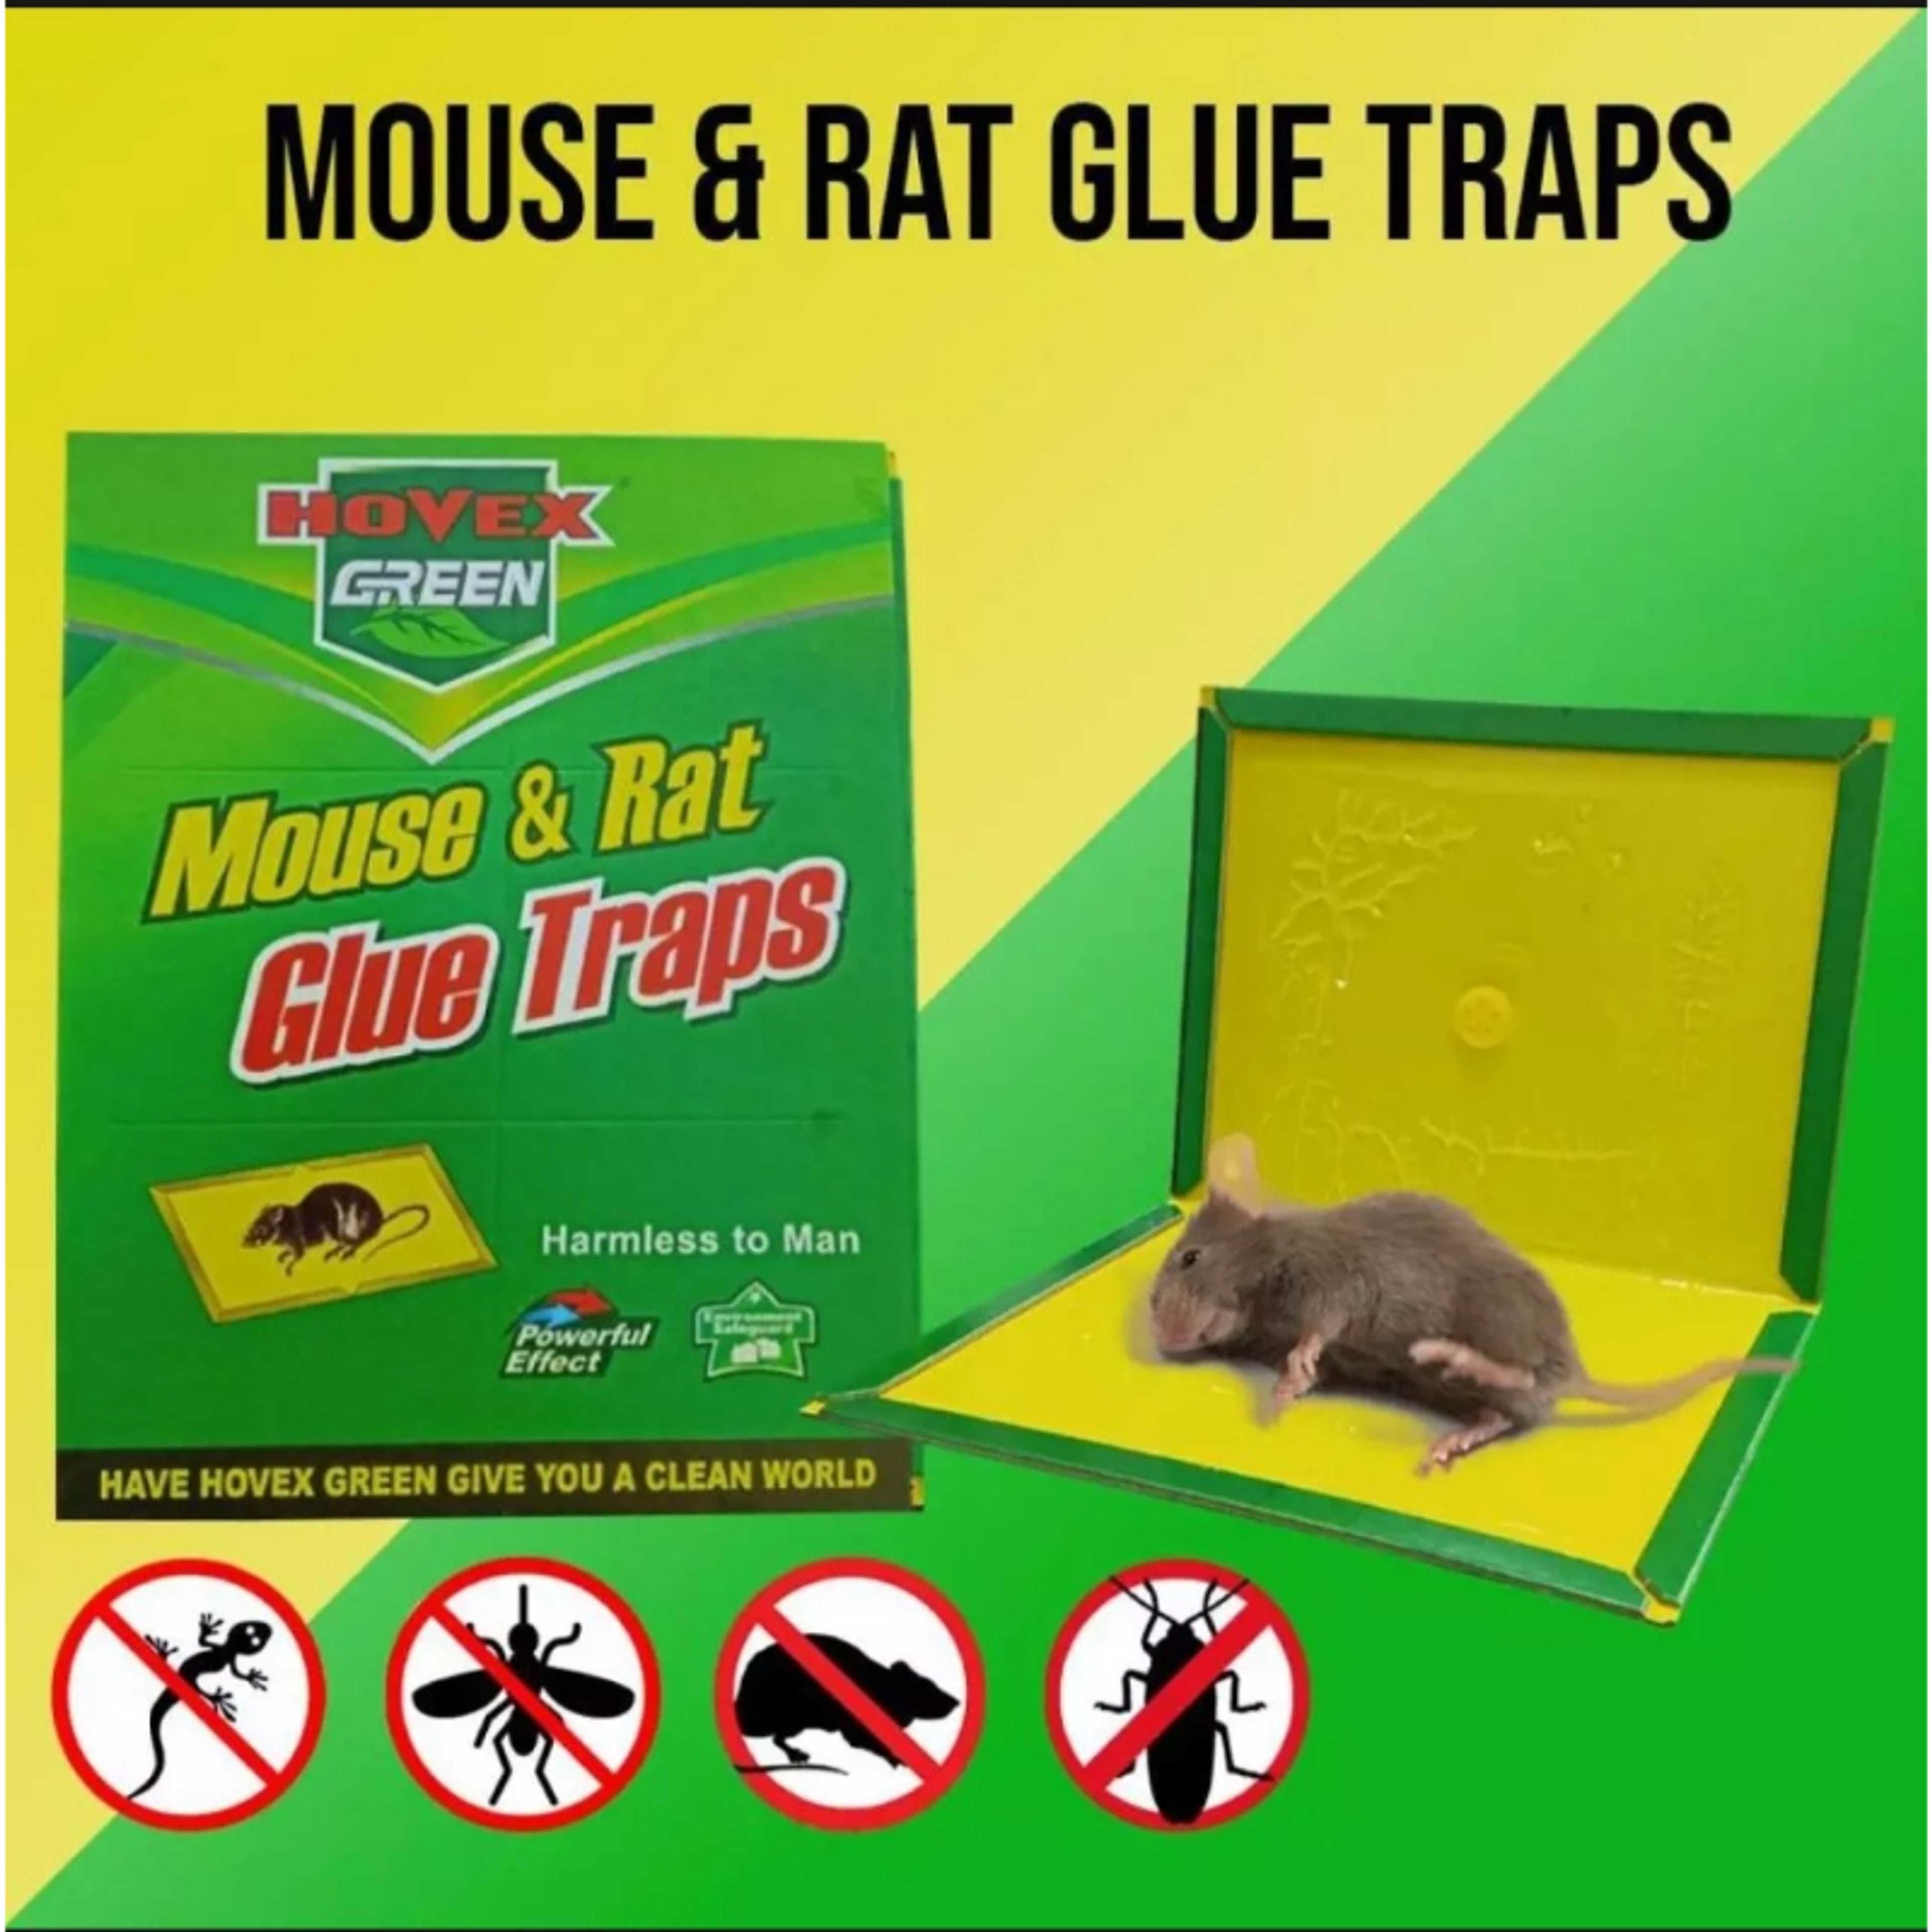 Reusable Expert Catch Mouse Glue Traps Mouse Size Glue Traps Sticky Boards Mouse Catcher Mice Professional Strength Glue Insect Lizard Spider Cockroach Rodent Snake Strongly